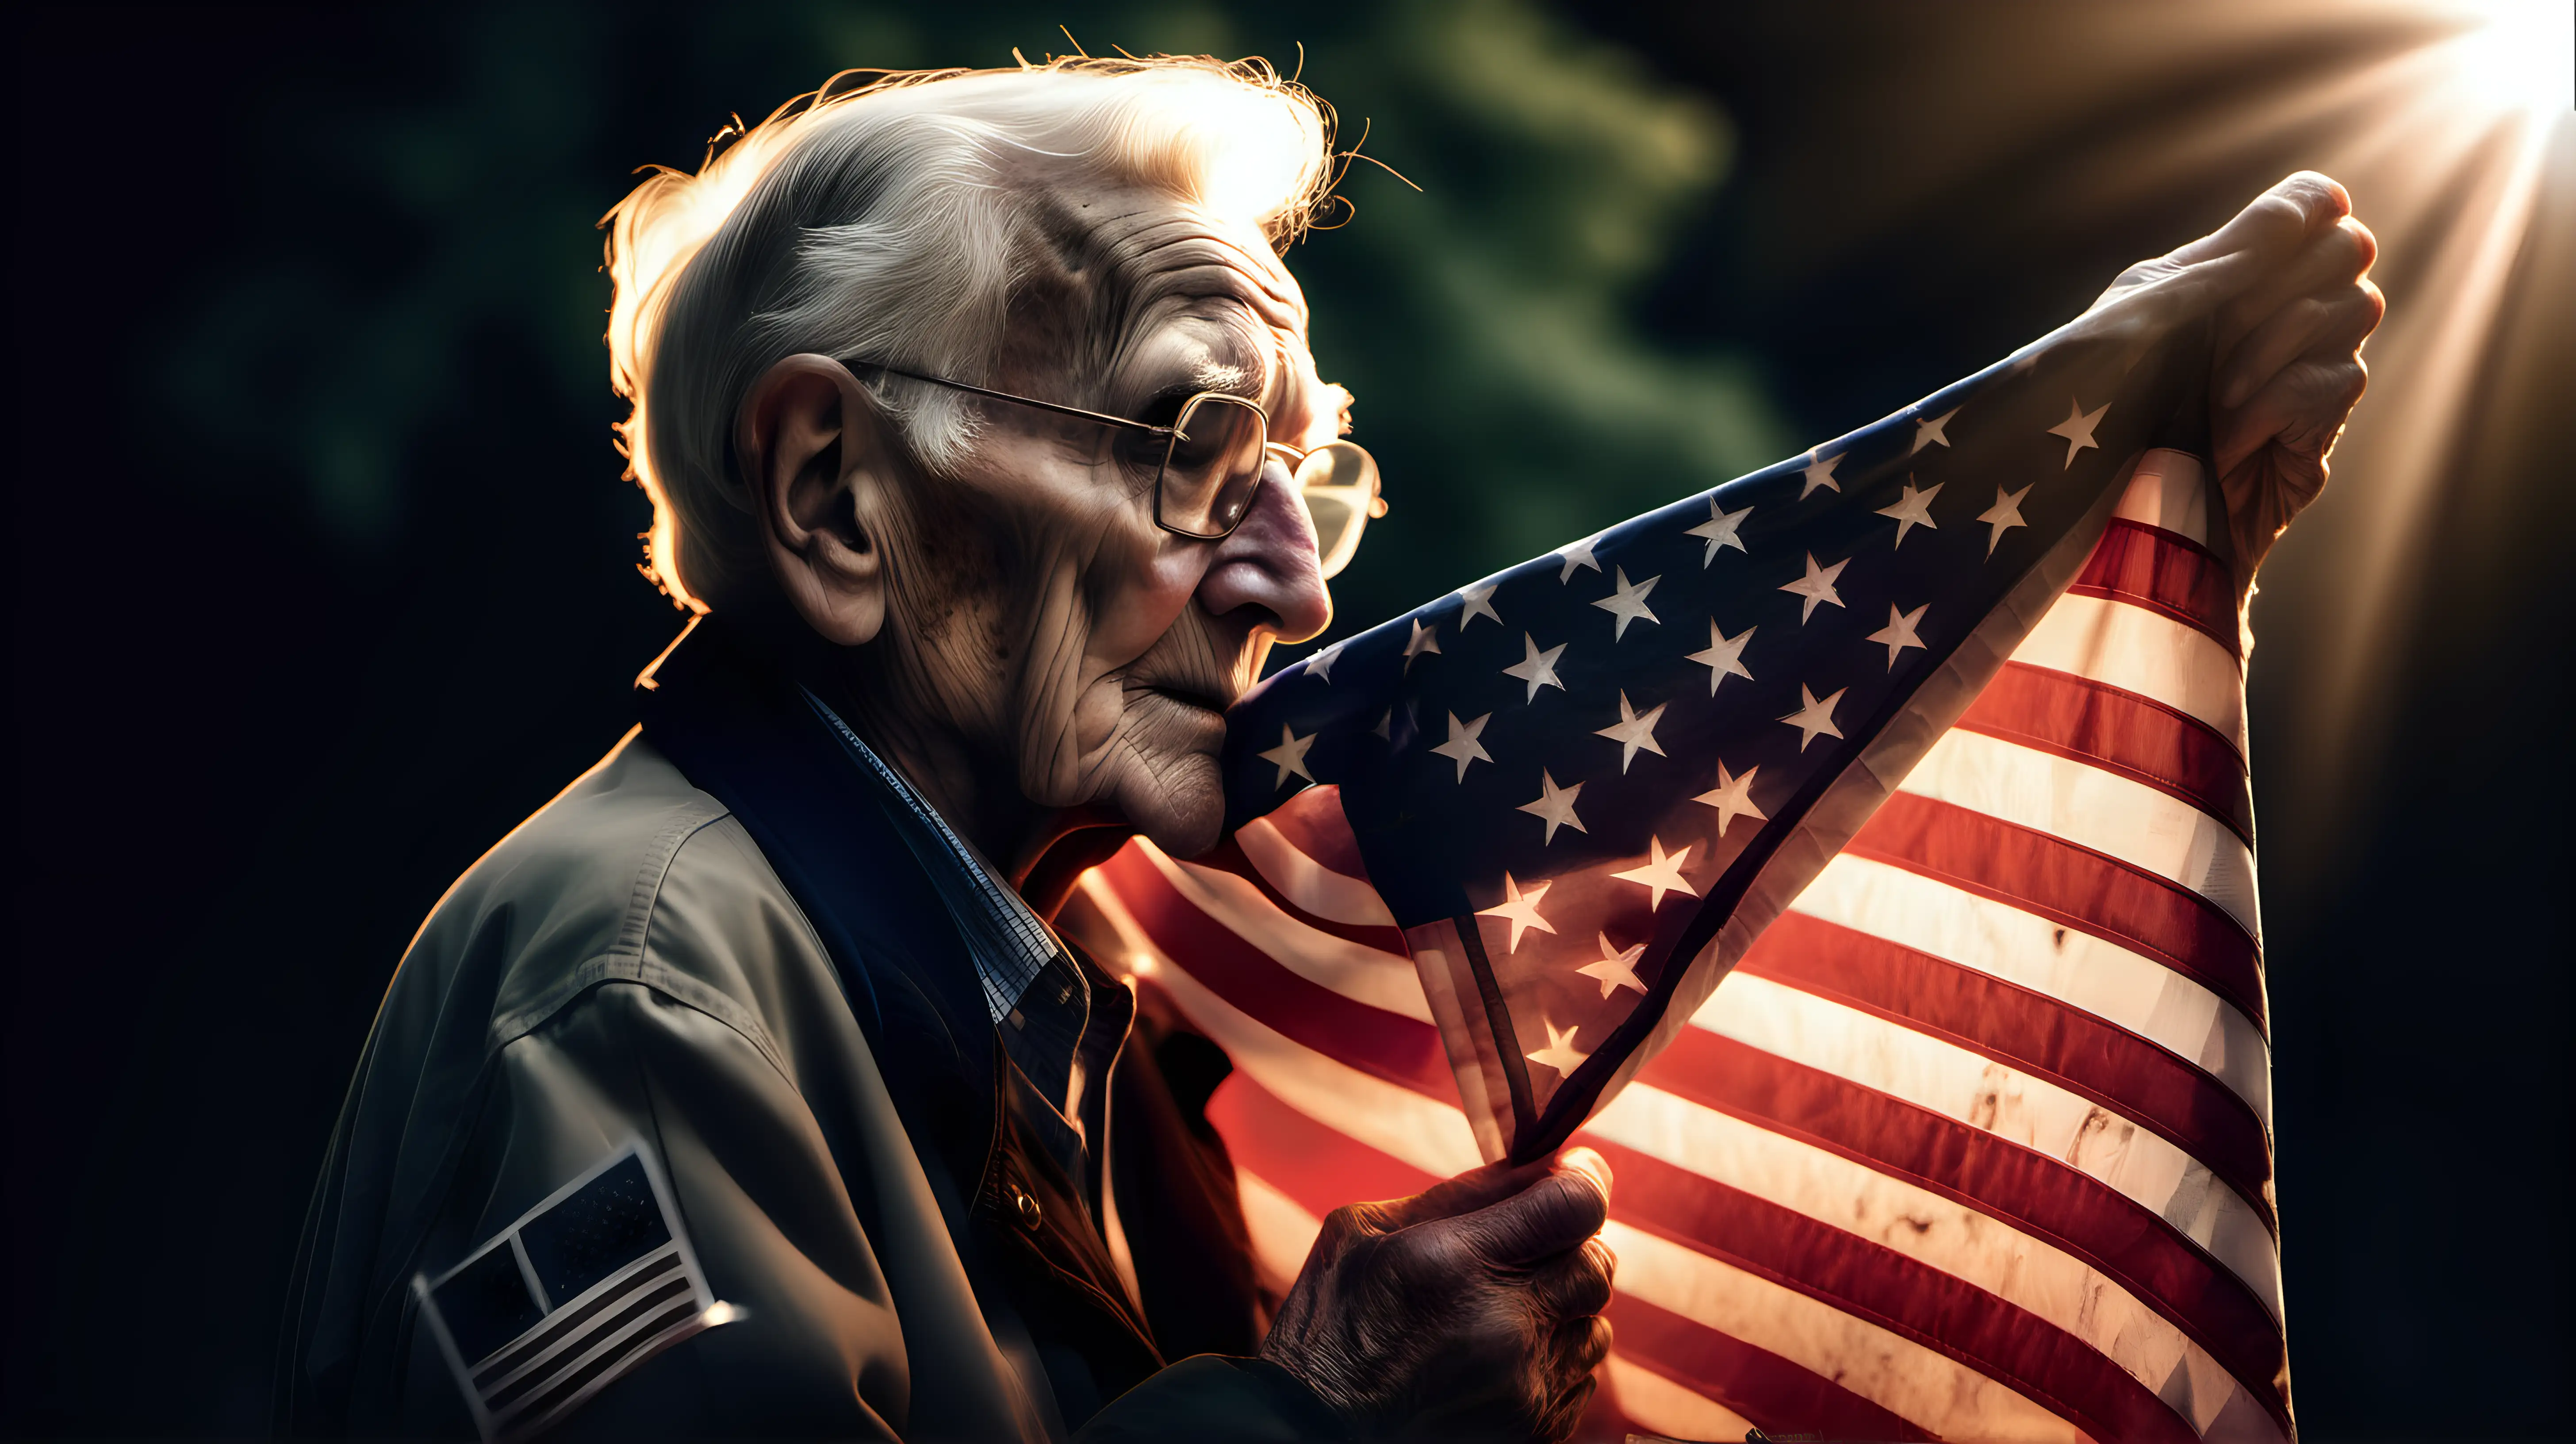 An elderly veteran tenderly holding a glowing American flag, the light illuminating their weathered features, a testament to a lifetime of devotion and sacrifice for their nation.